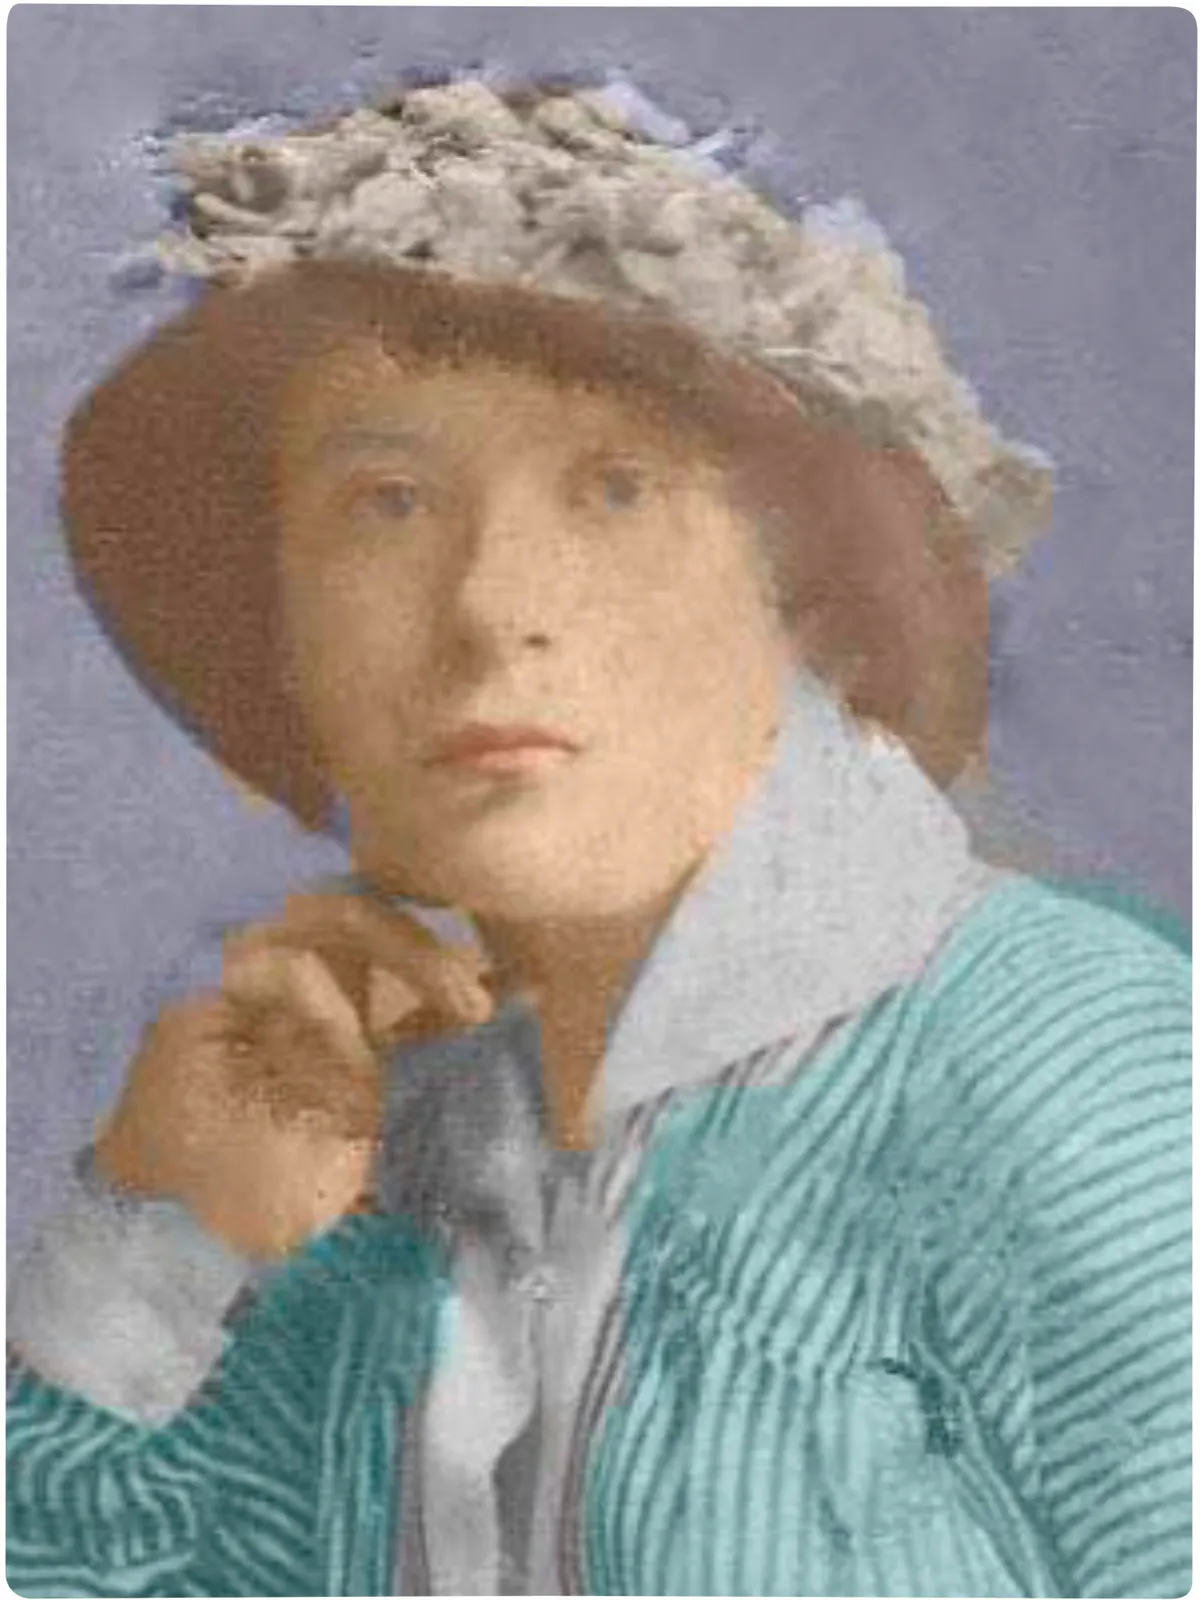 Tinted photograph of a woman with brown hair wearing a green cardigan and a bonnet